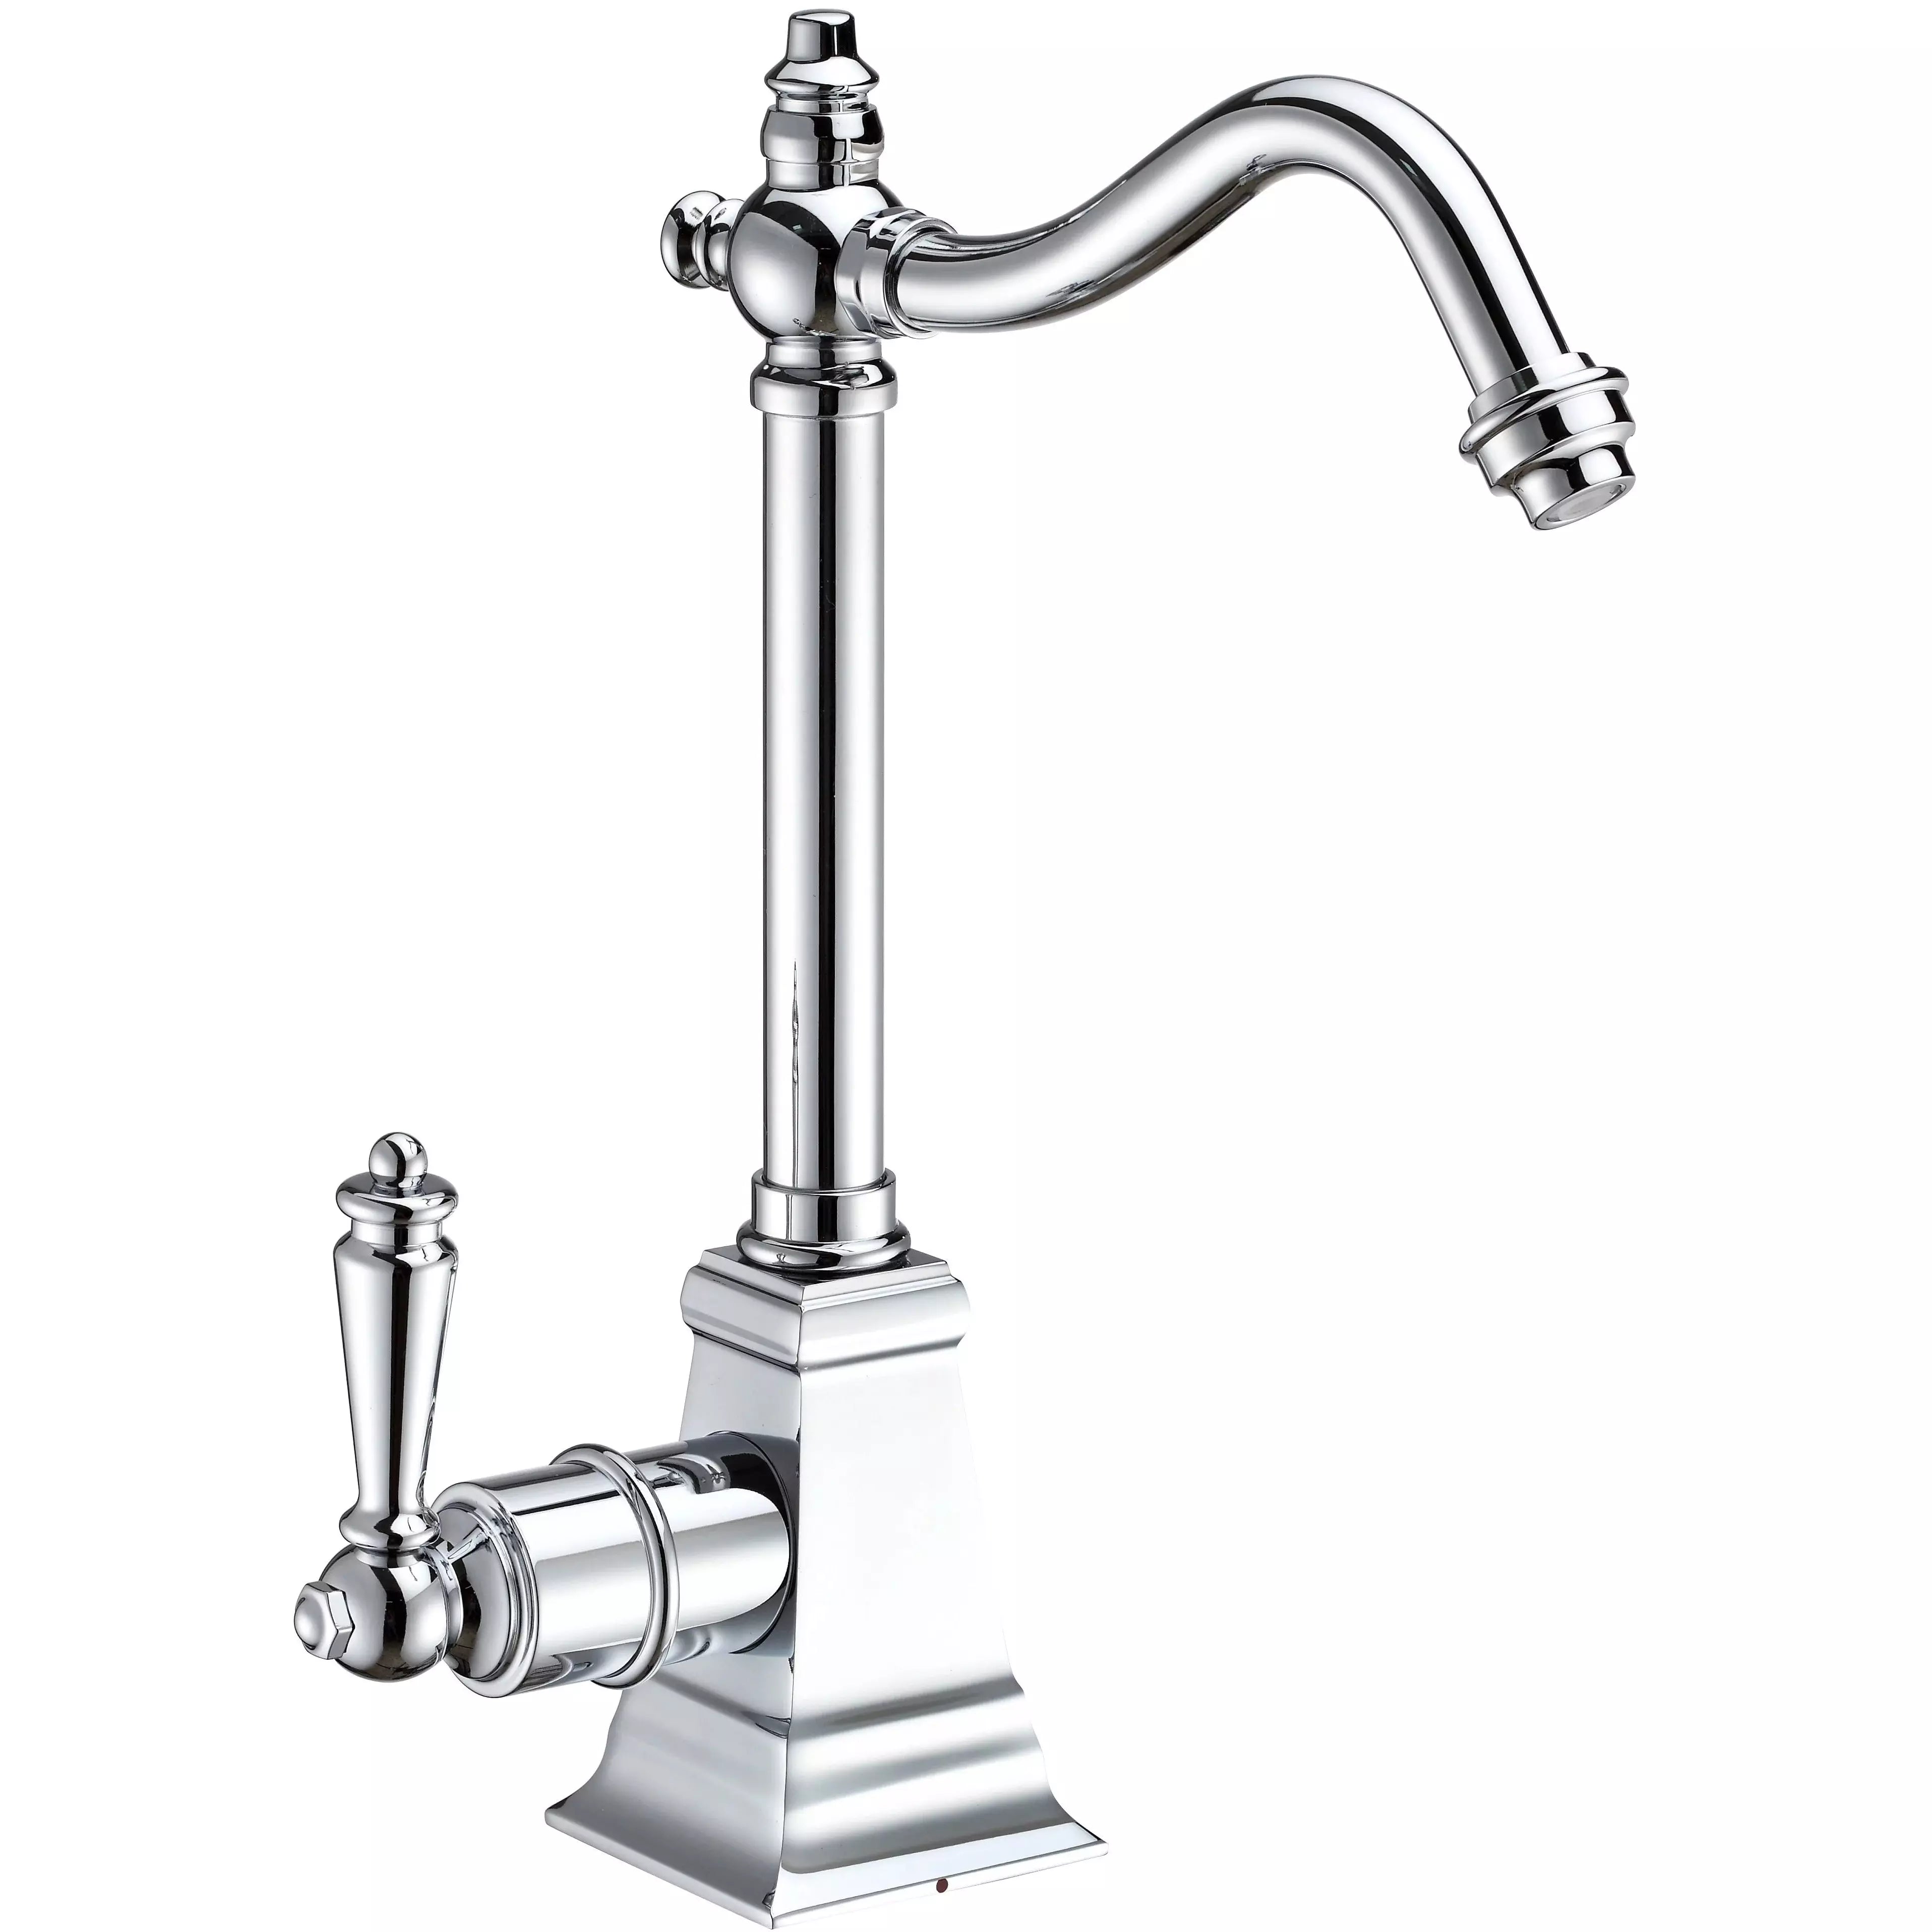 WHITEHAUS Point of Use Instant Hot Water Drinking Faucet with Traditional Swivel Spout - WHFH-H2011